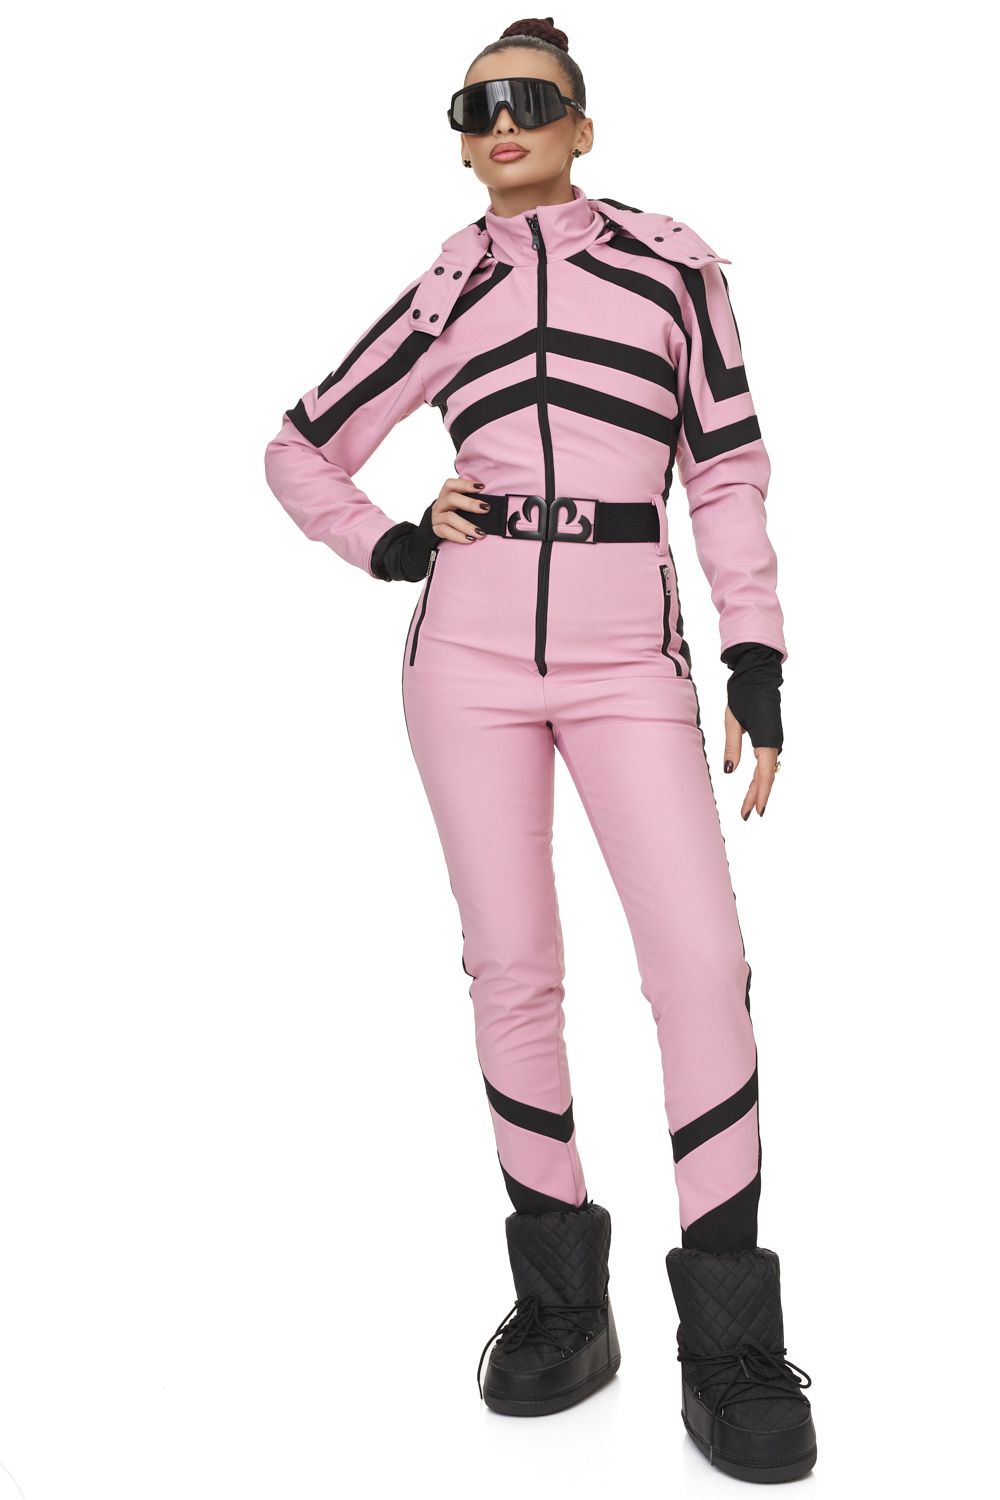 Abyem Bogas pink casual ski overalls